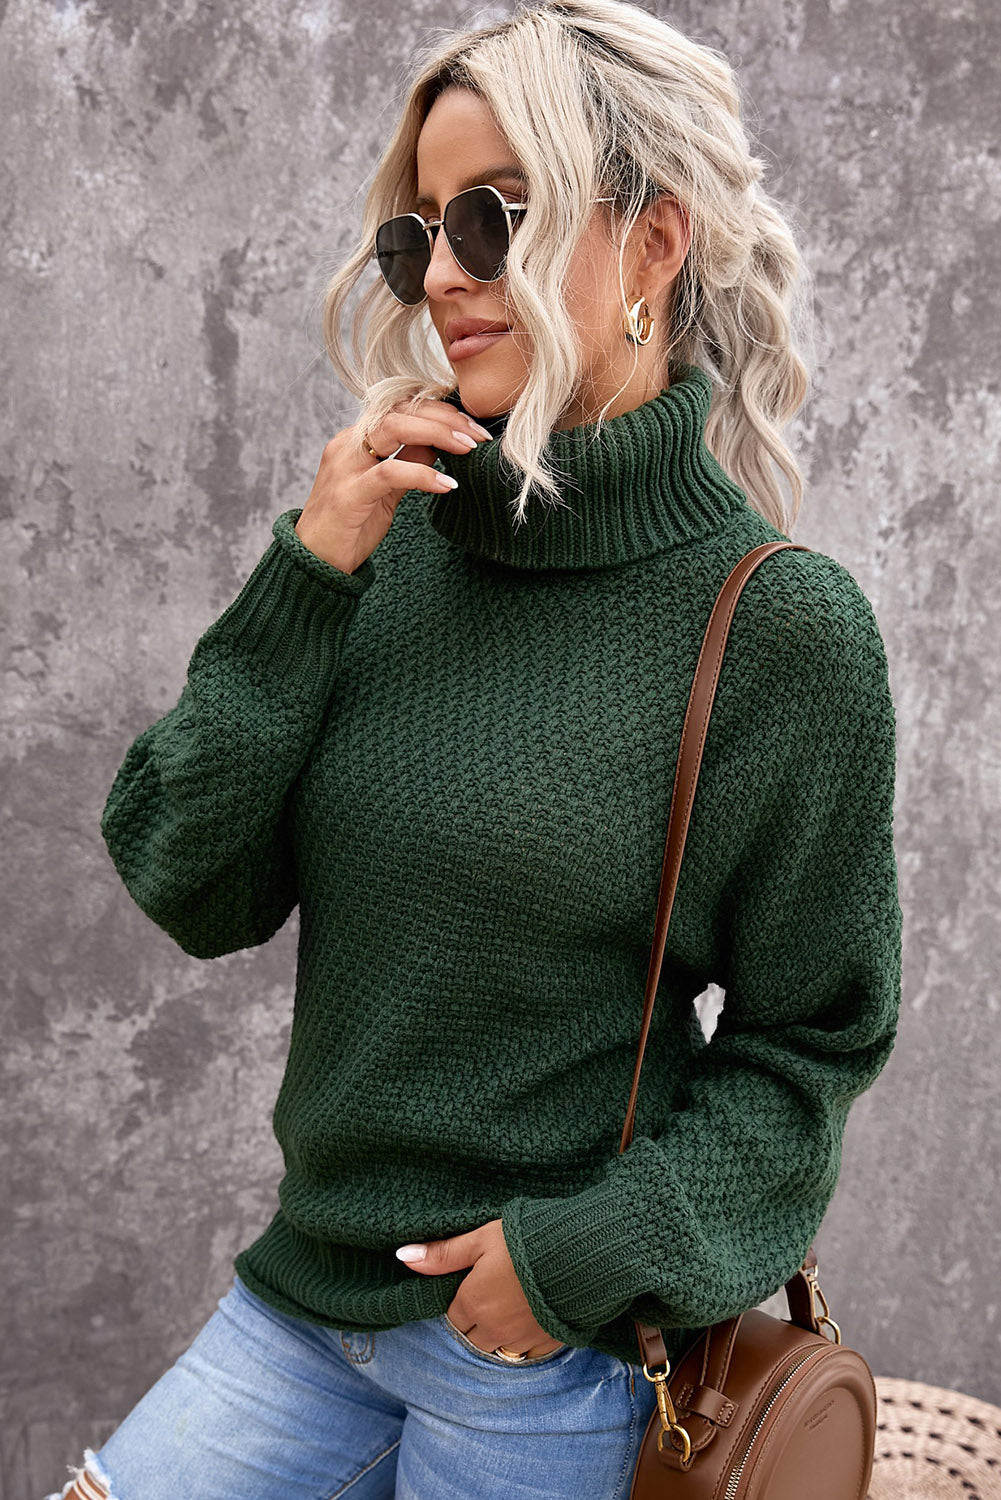 Green Women's Winter Casual Long Sleeve Turtleneck Solid Color Drop Shoulder Cable Knit Sweater Chunky Sweater LC270200-9